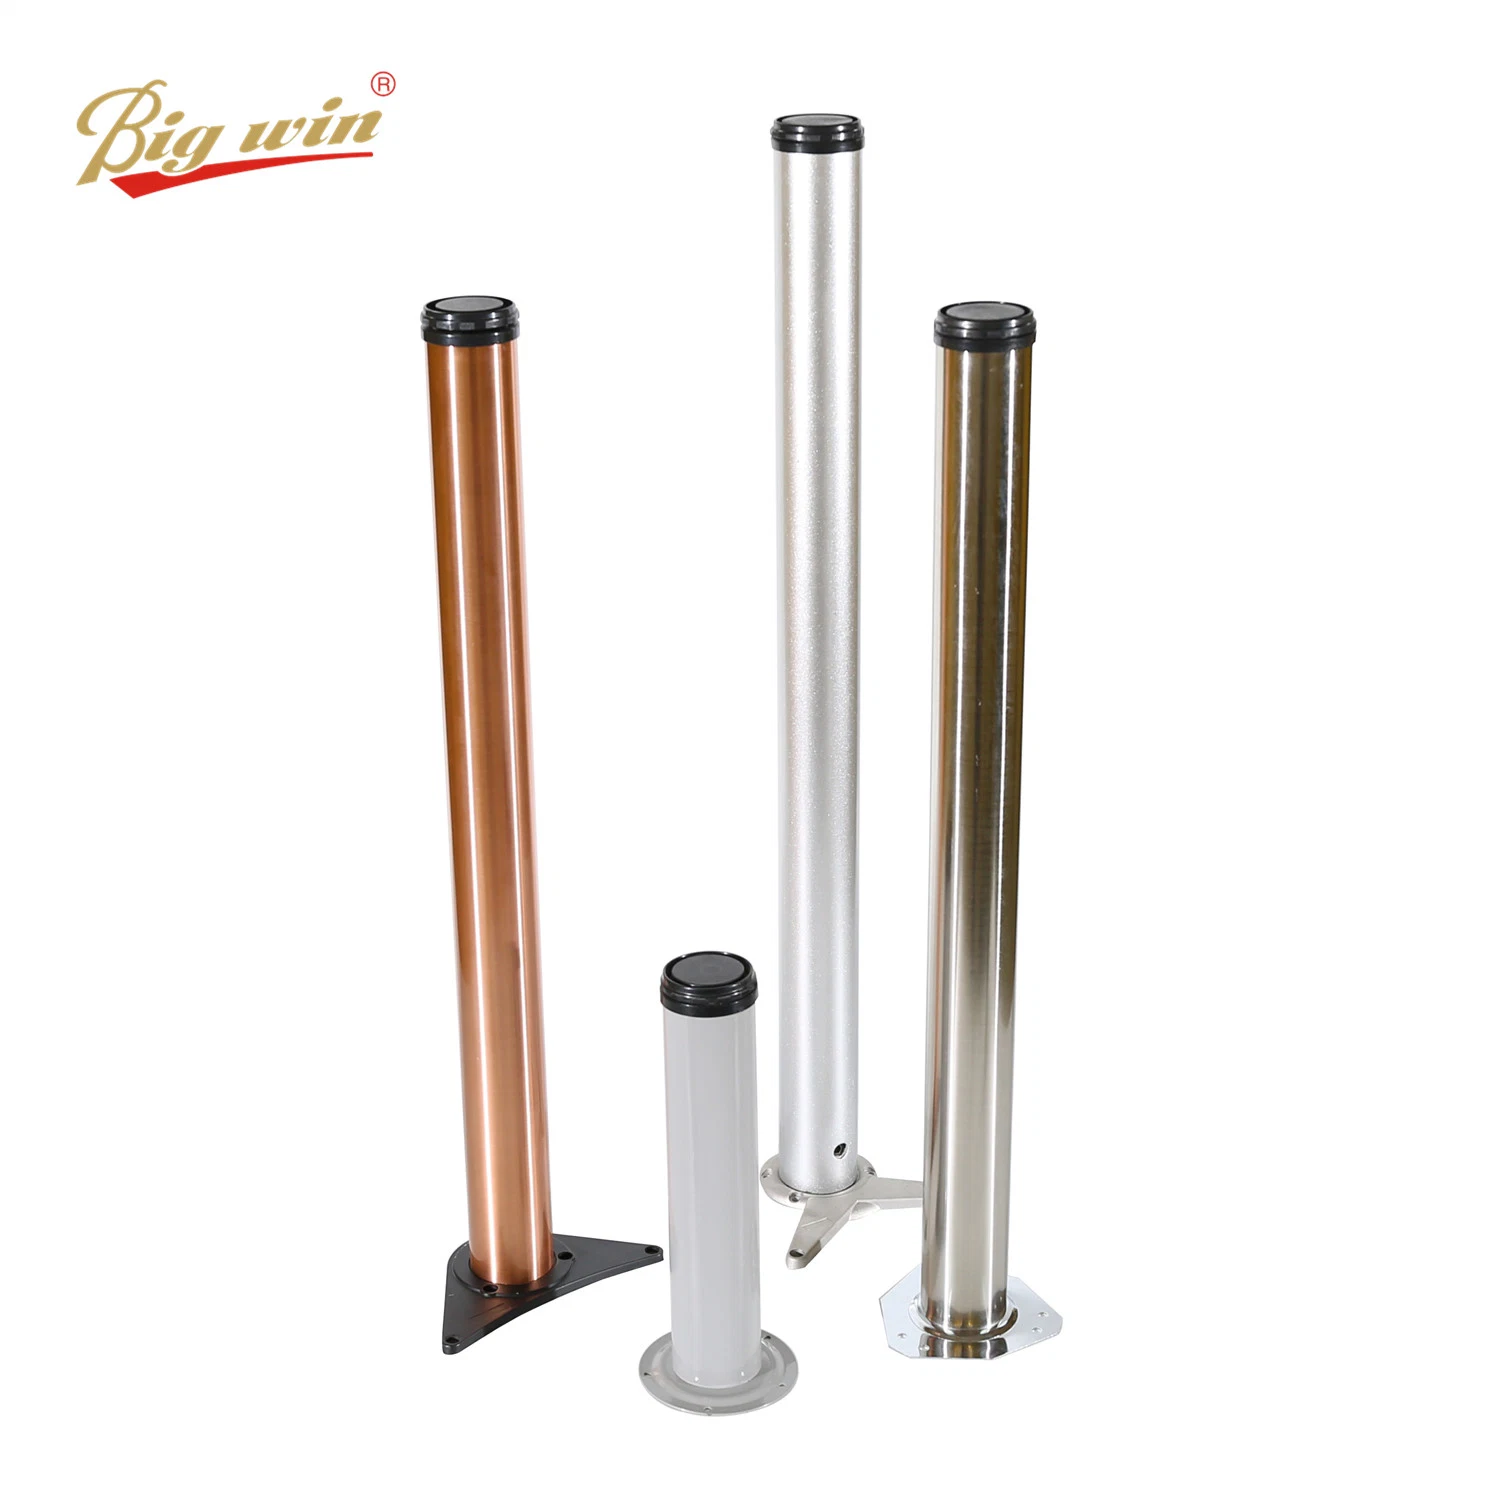 High Quality Table Legs Furniture Hardware Accessories